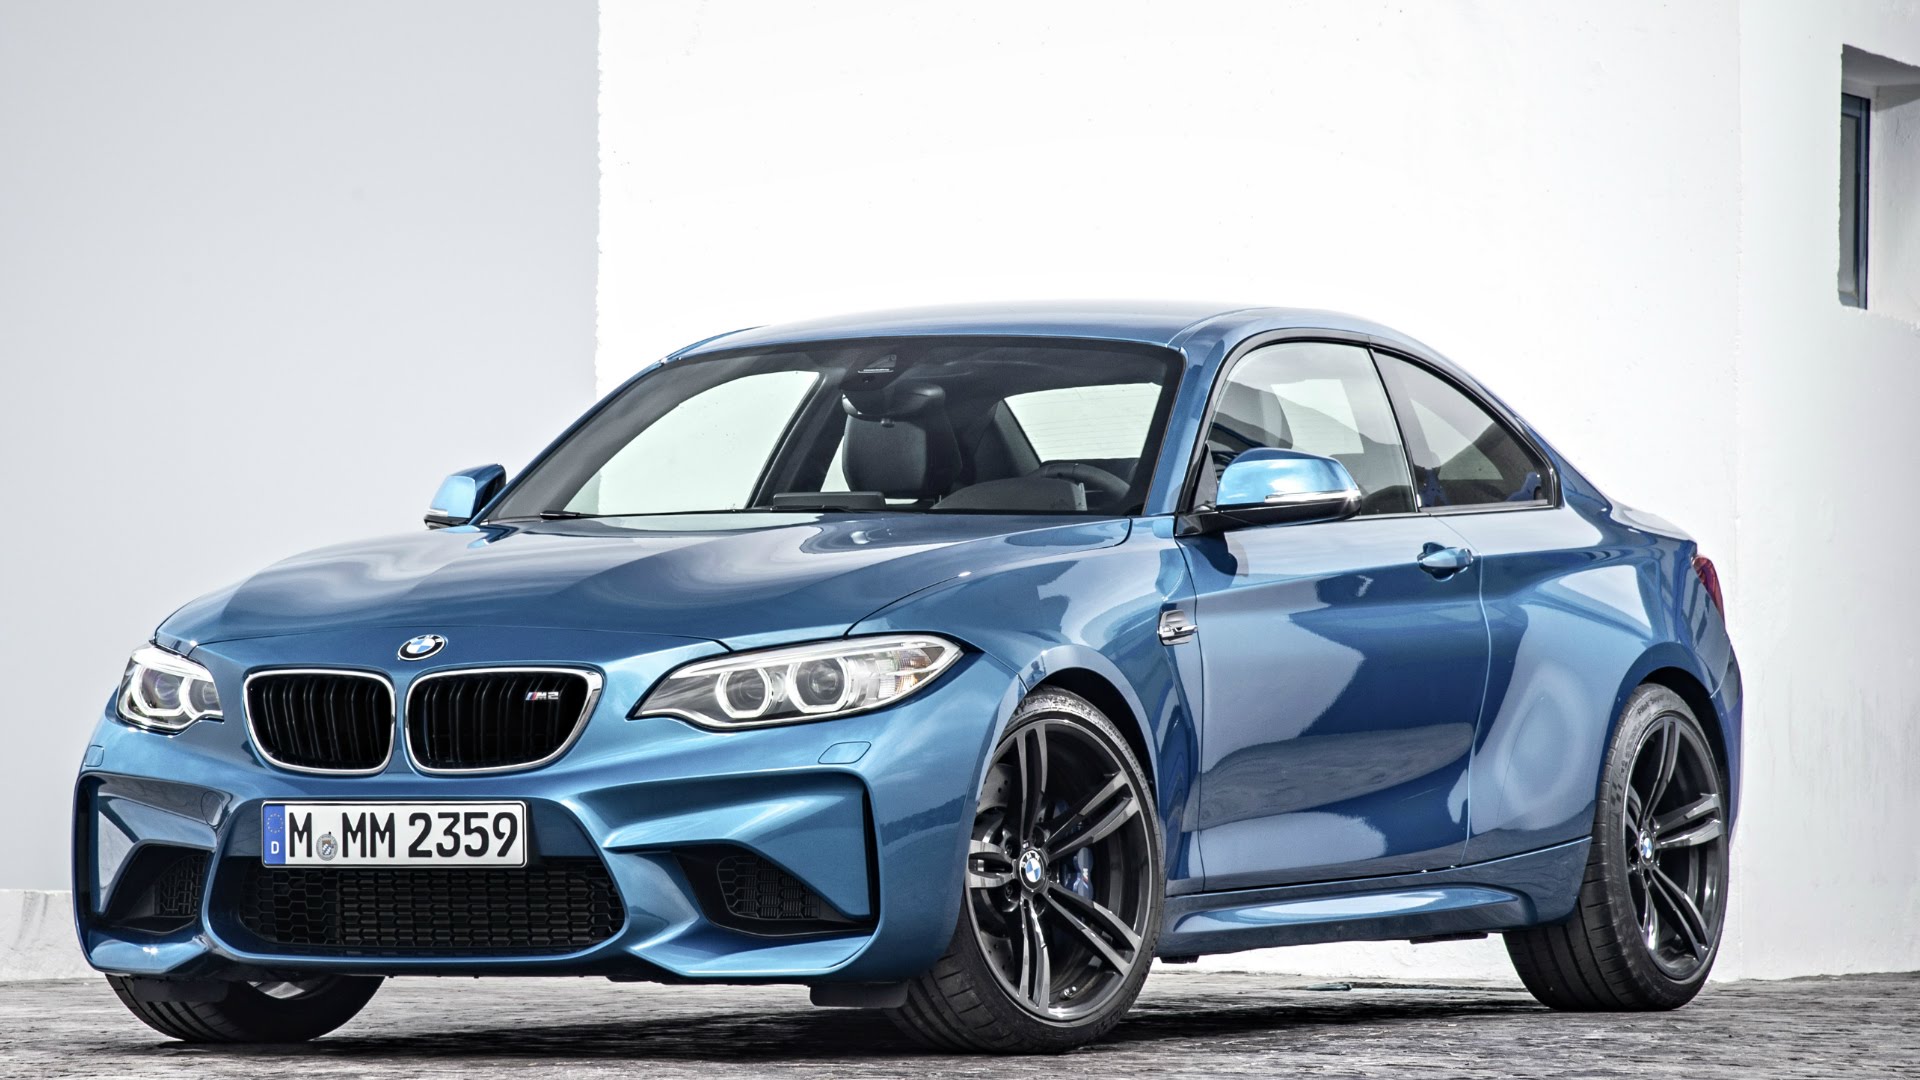 HQ BMW M2 Coupe Wallpapers | File 257.43Kb